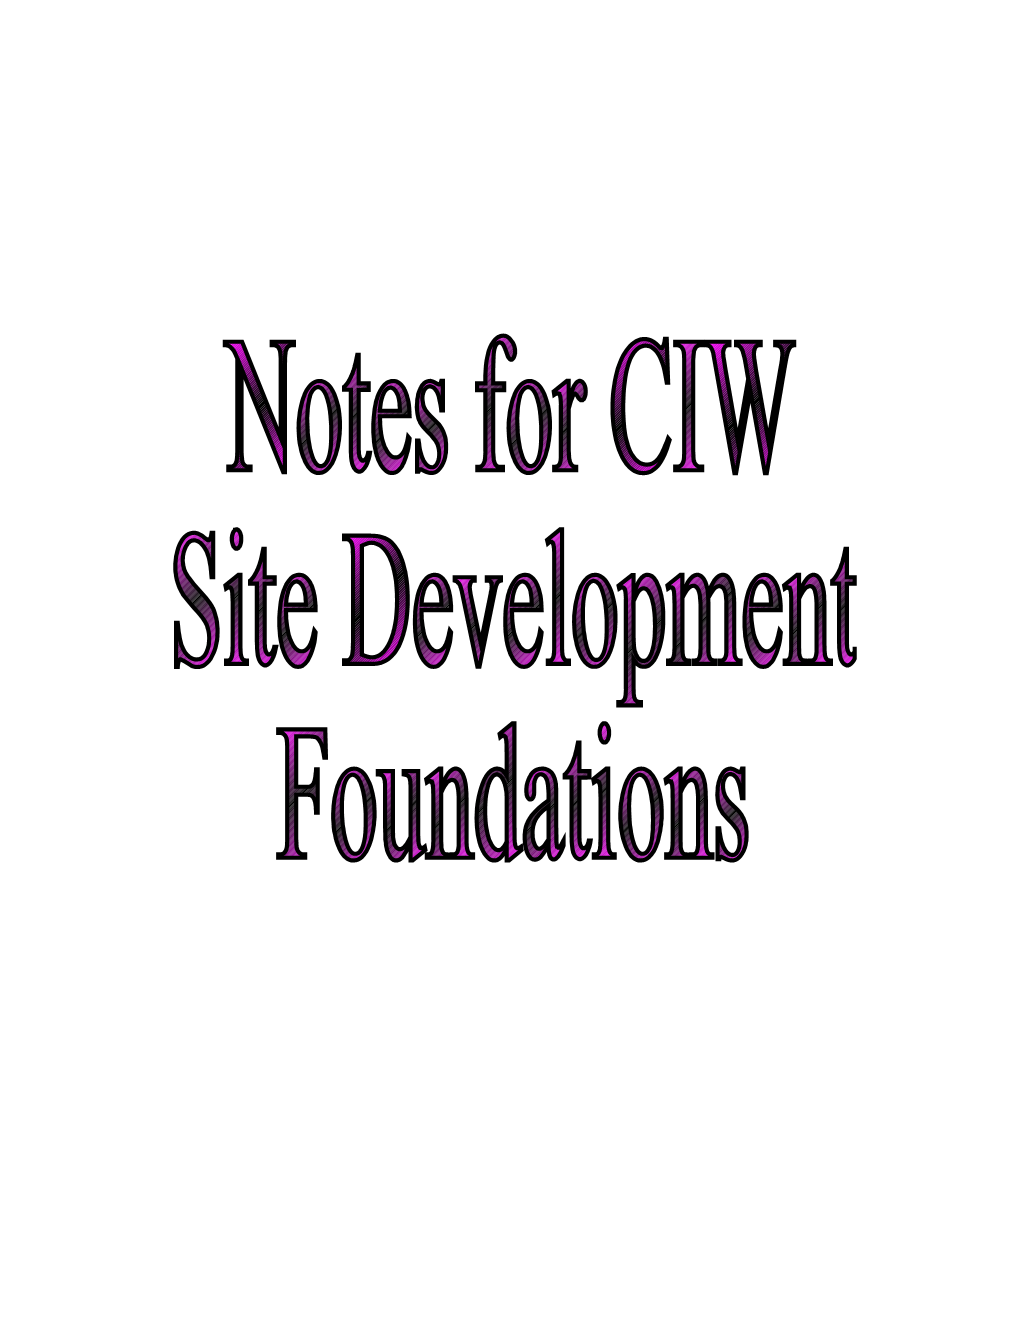 Notes for CIW Course